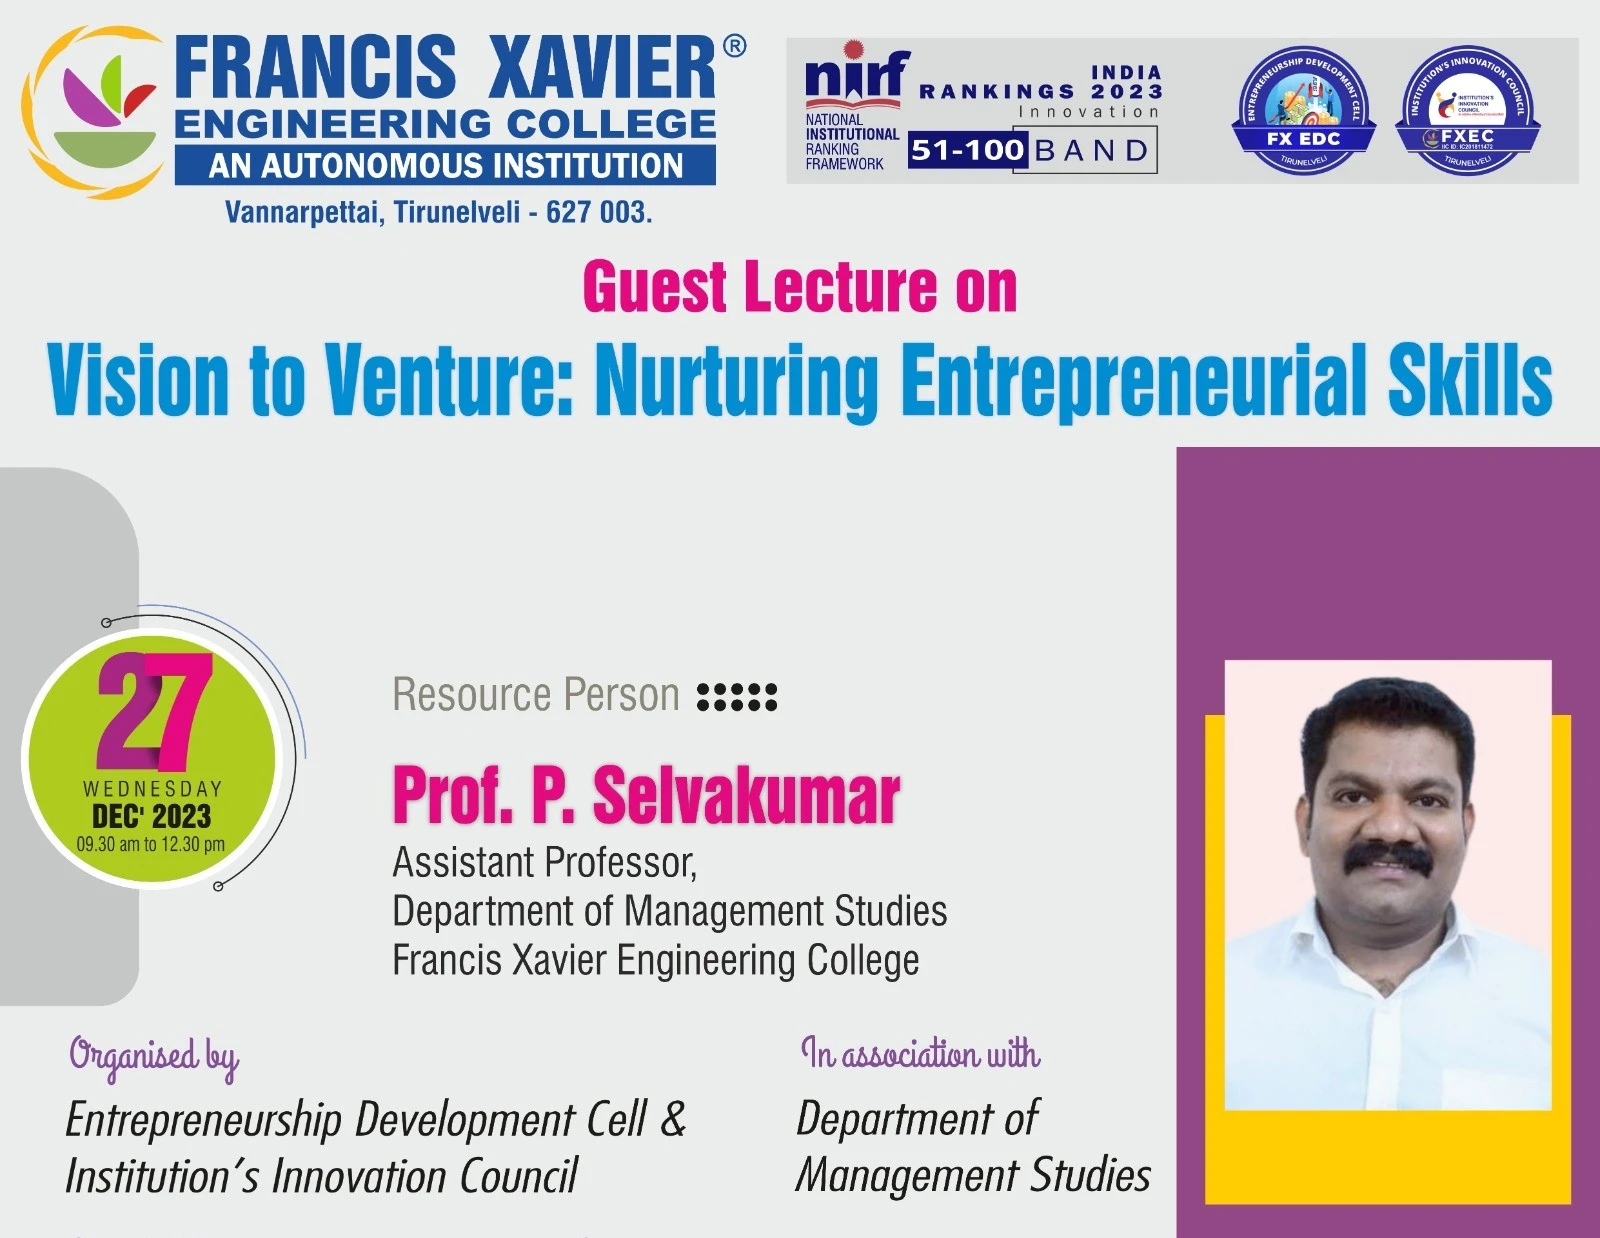 Guest Lecture on Vision to Venture: Nurturing Entrepreneurial Skills